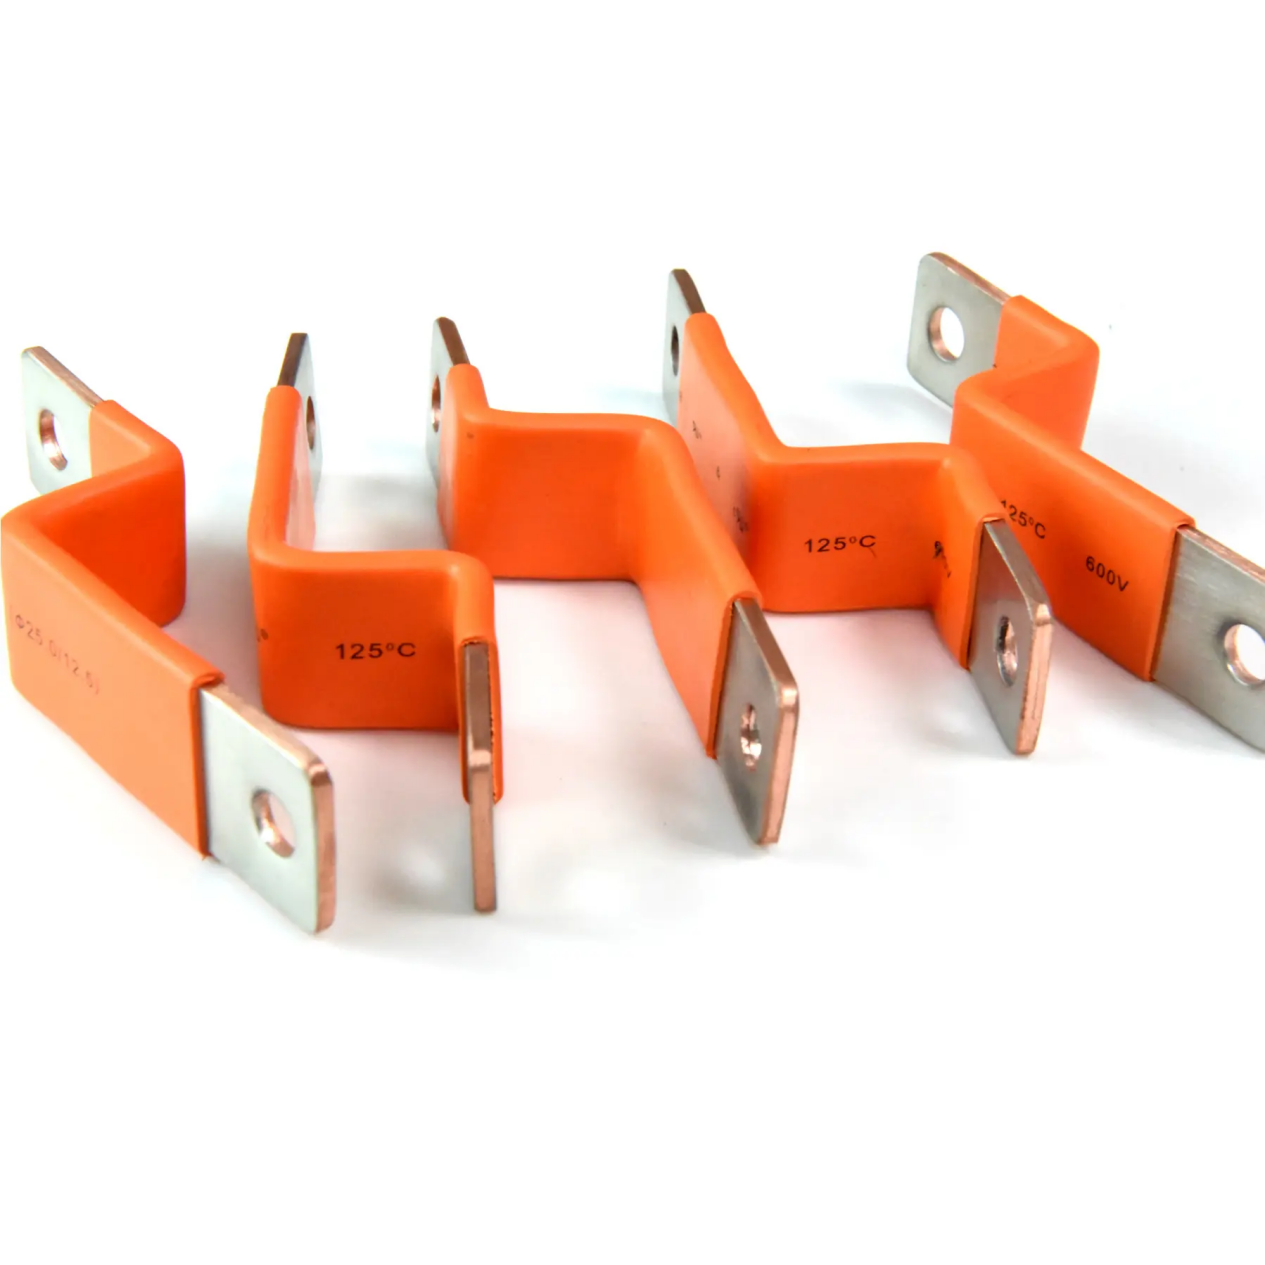 The reason for using flexible copper busbars to connect battery modules in new energy vehicles?